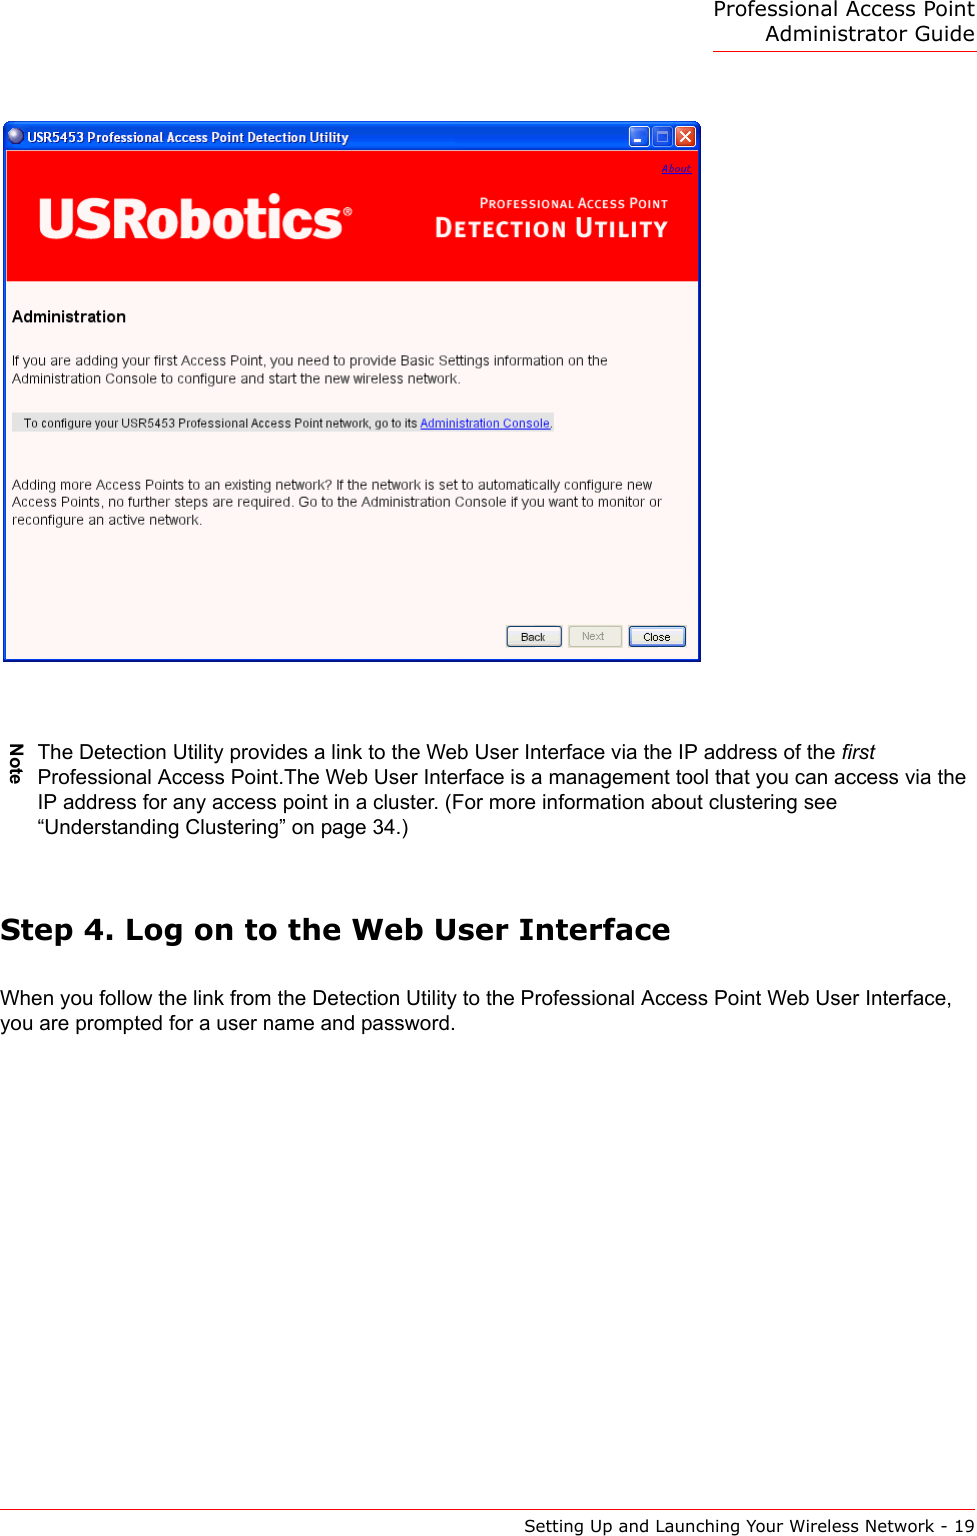 Professional Access Point Administrator GuideSetting Up and Launching Your Wireless Network - 19Step 4. Log on to the Web User InterfaceWhen you follow the link from the Detection Utility to the Professional Access Point Web User Interface, you are prompted for a user name and password.NoteThe Detection Utility provides a link to the Web User Interface via the IP address of the first Professional Access Point.The Web User Interface is a management tool that you can access via the IP address for any access point in a cluster. (For more information about clustering see “Understanding Clustering” on page 34.) 